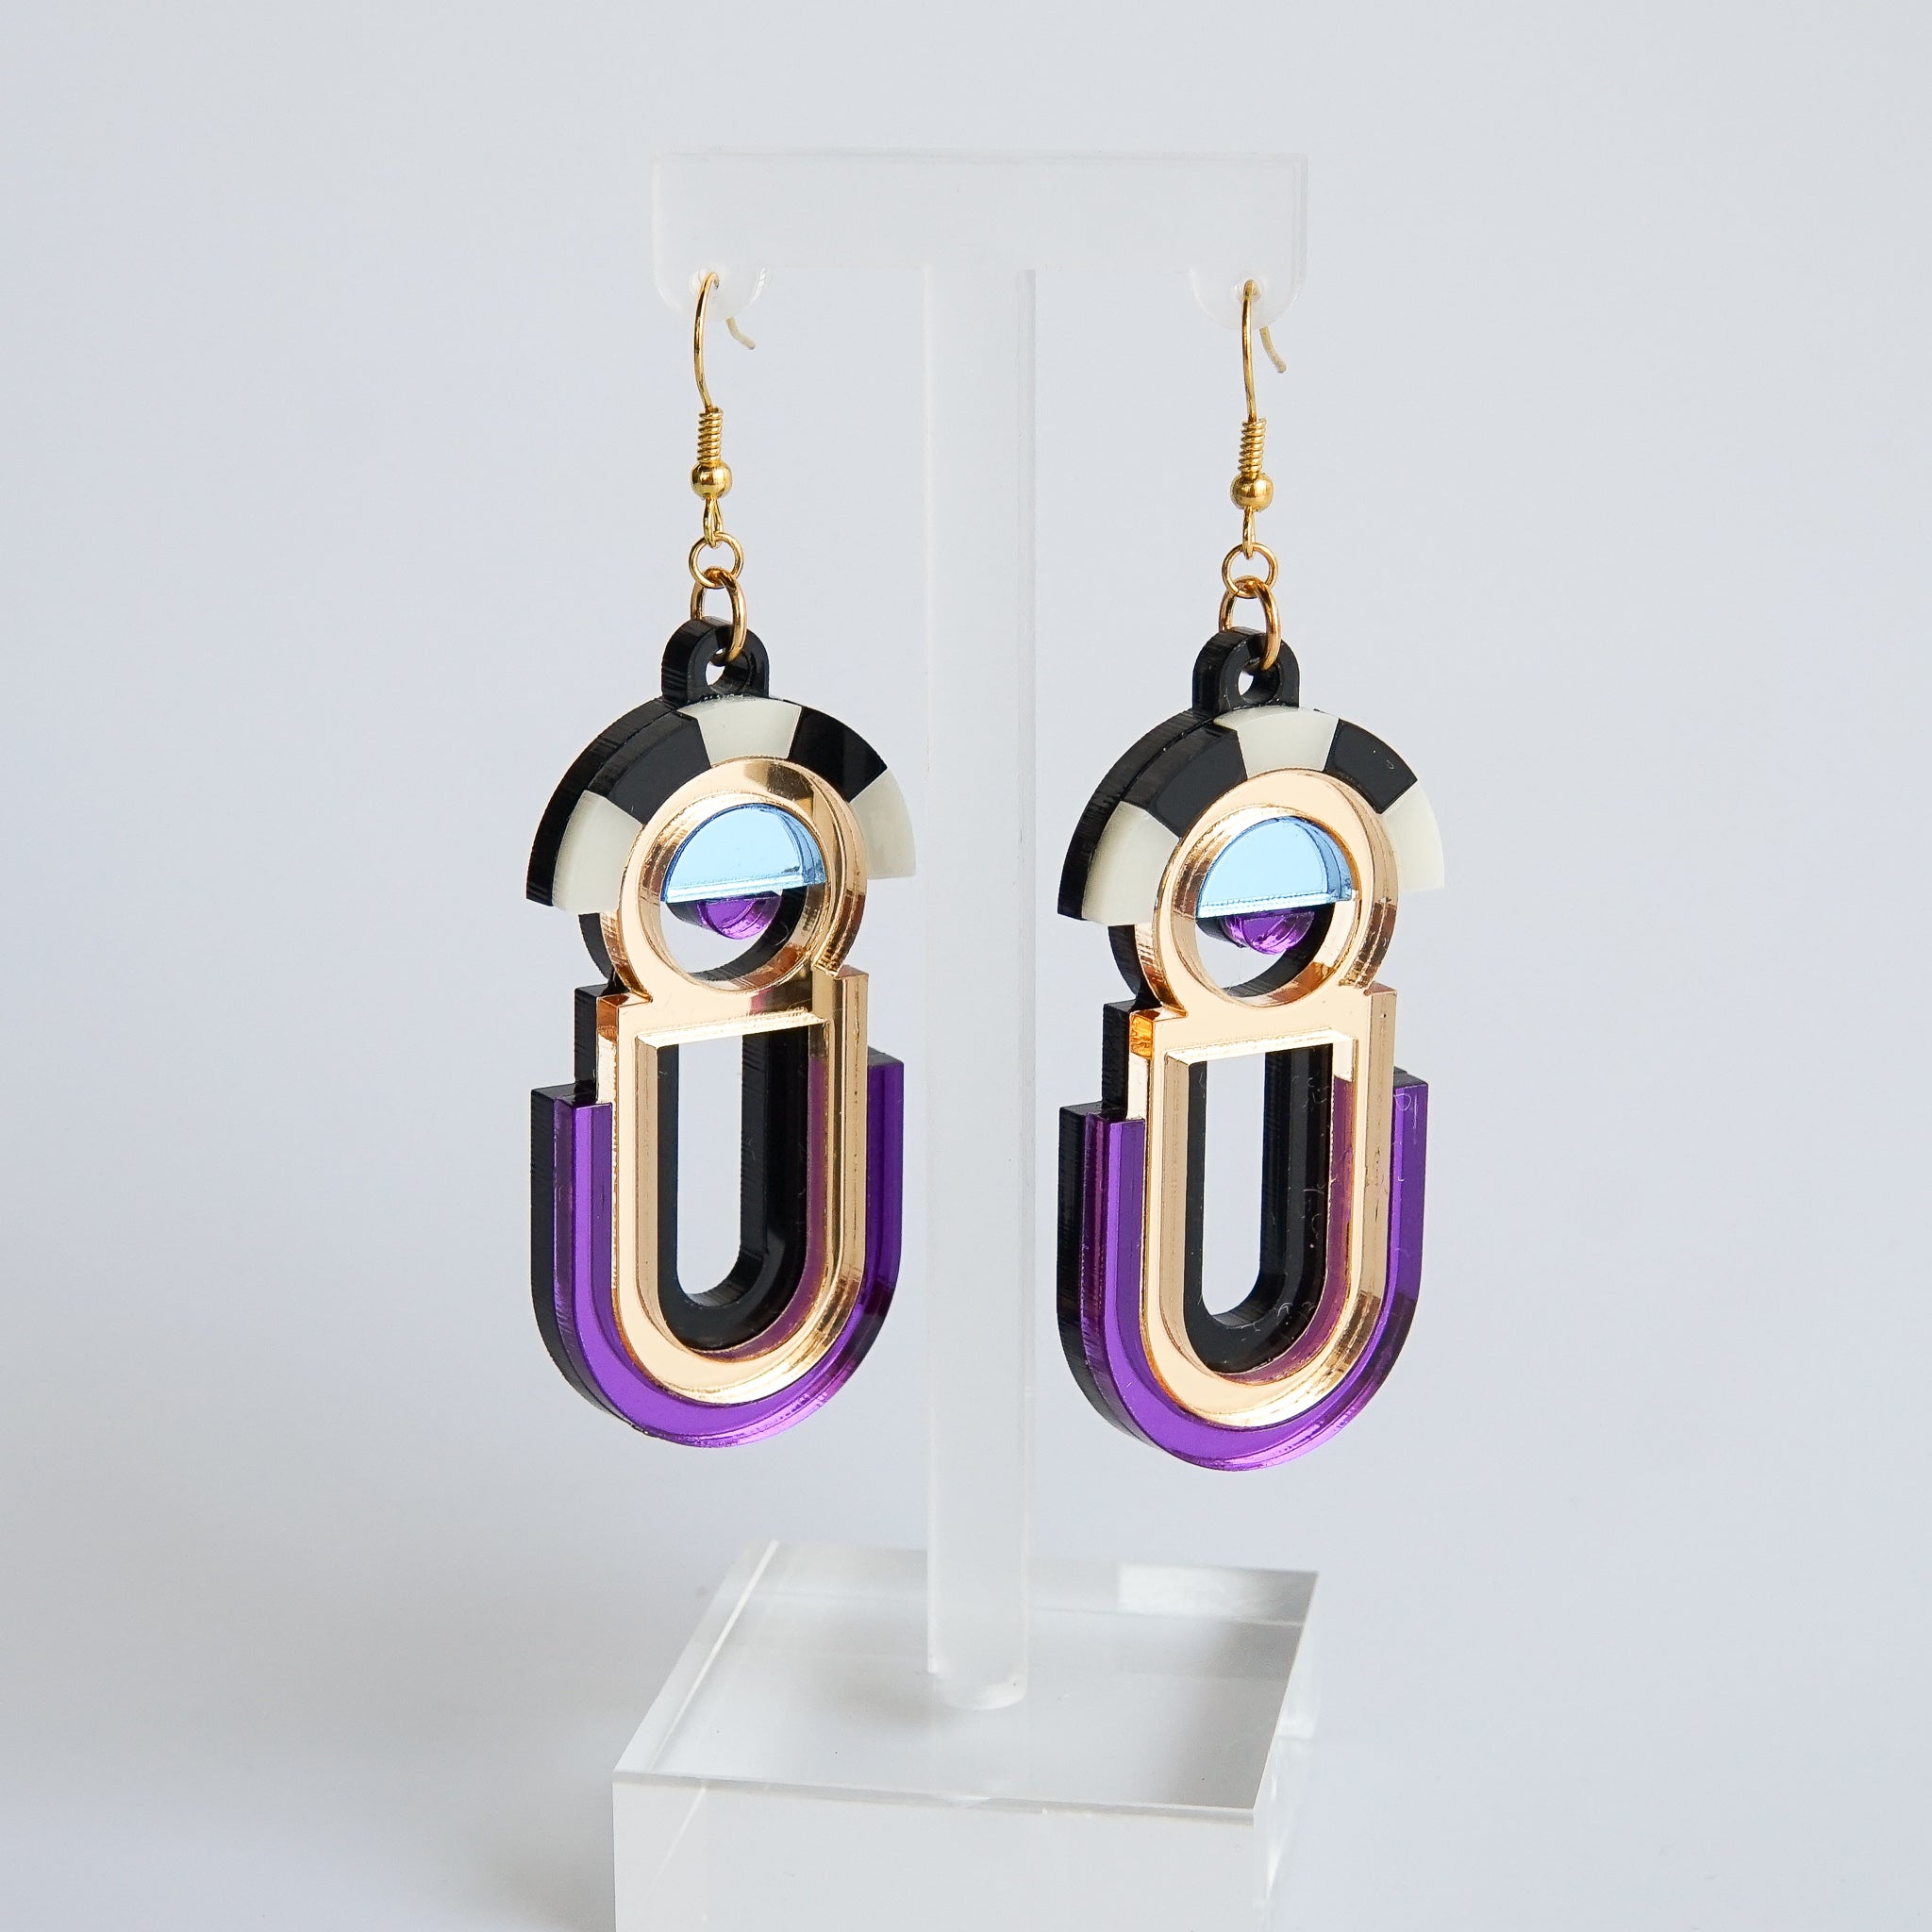 Mystic Forms: Form 061 Earrings